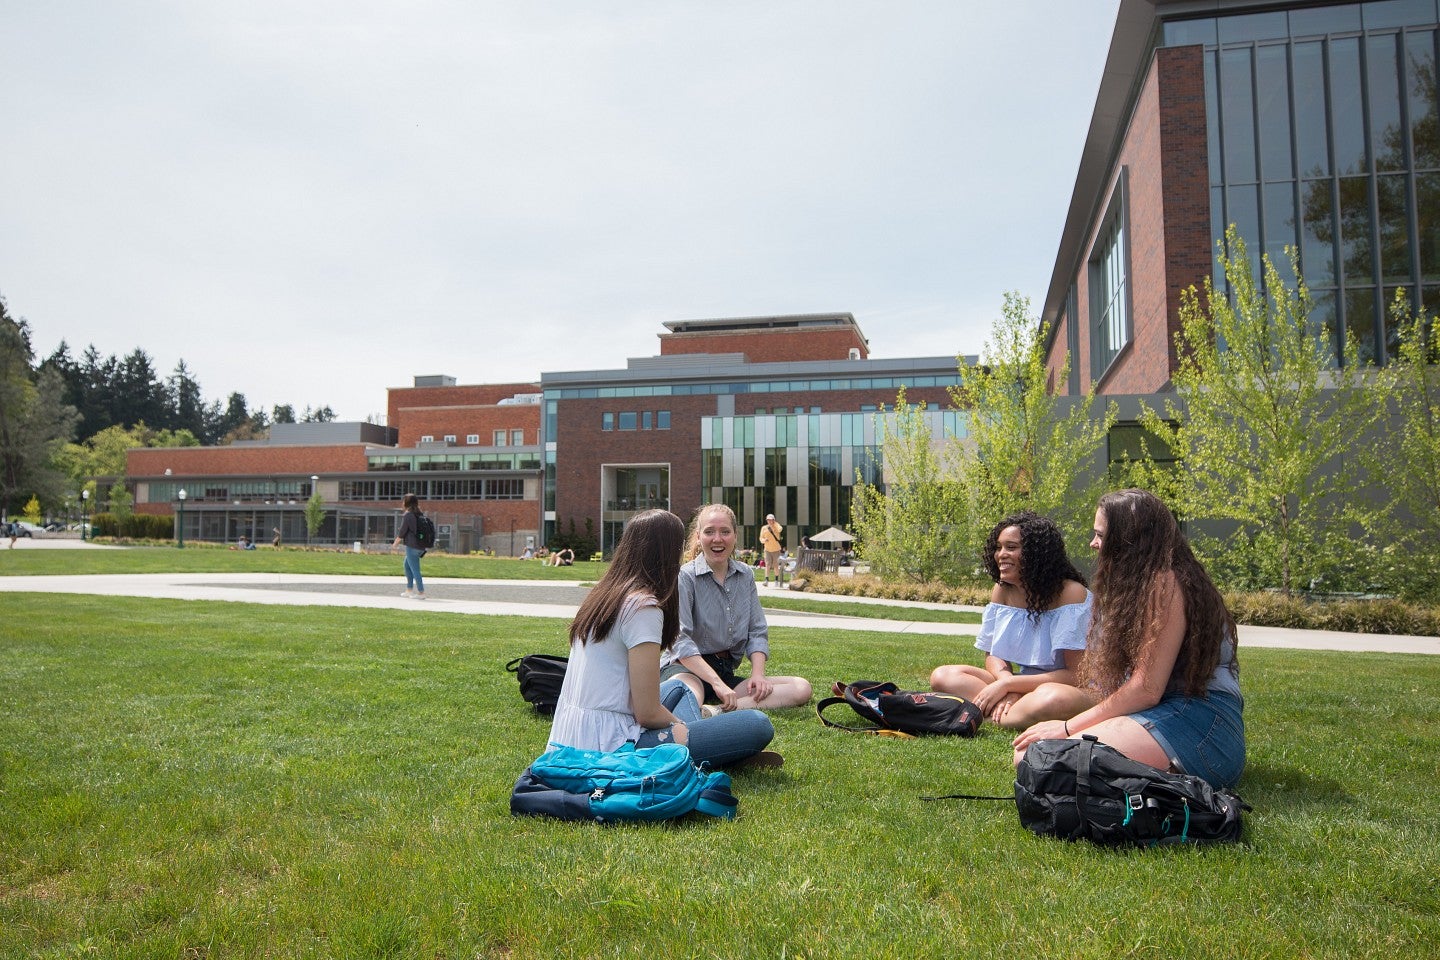 Four female students sitting on a lawn and talking on a sunshiny day.